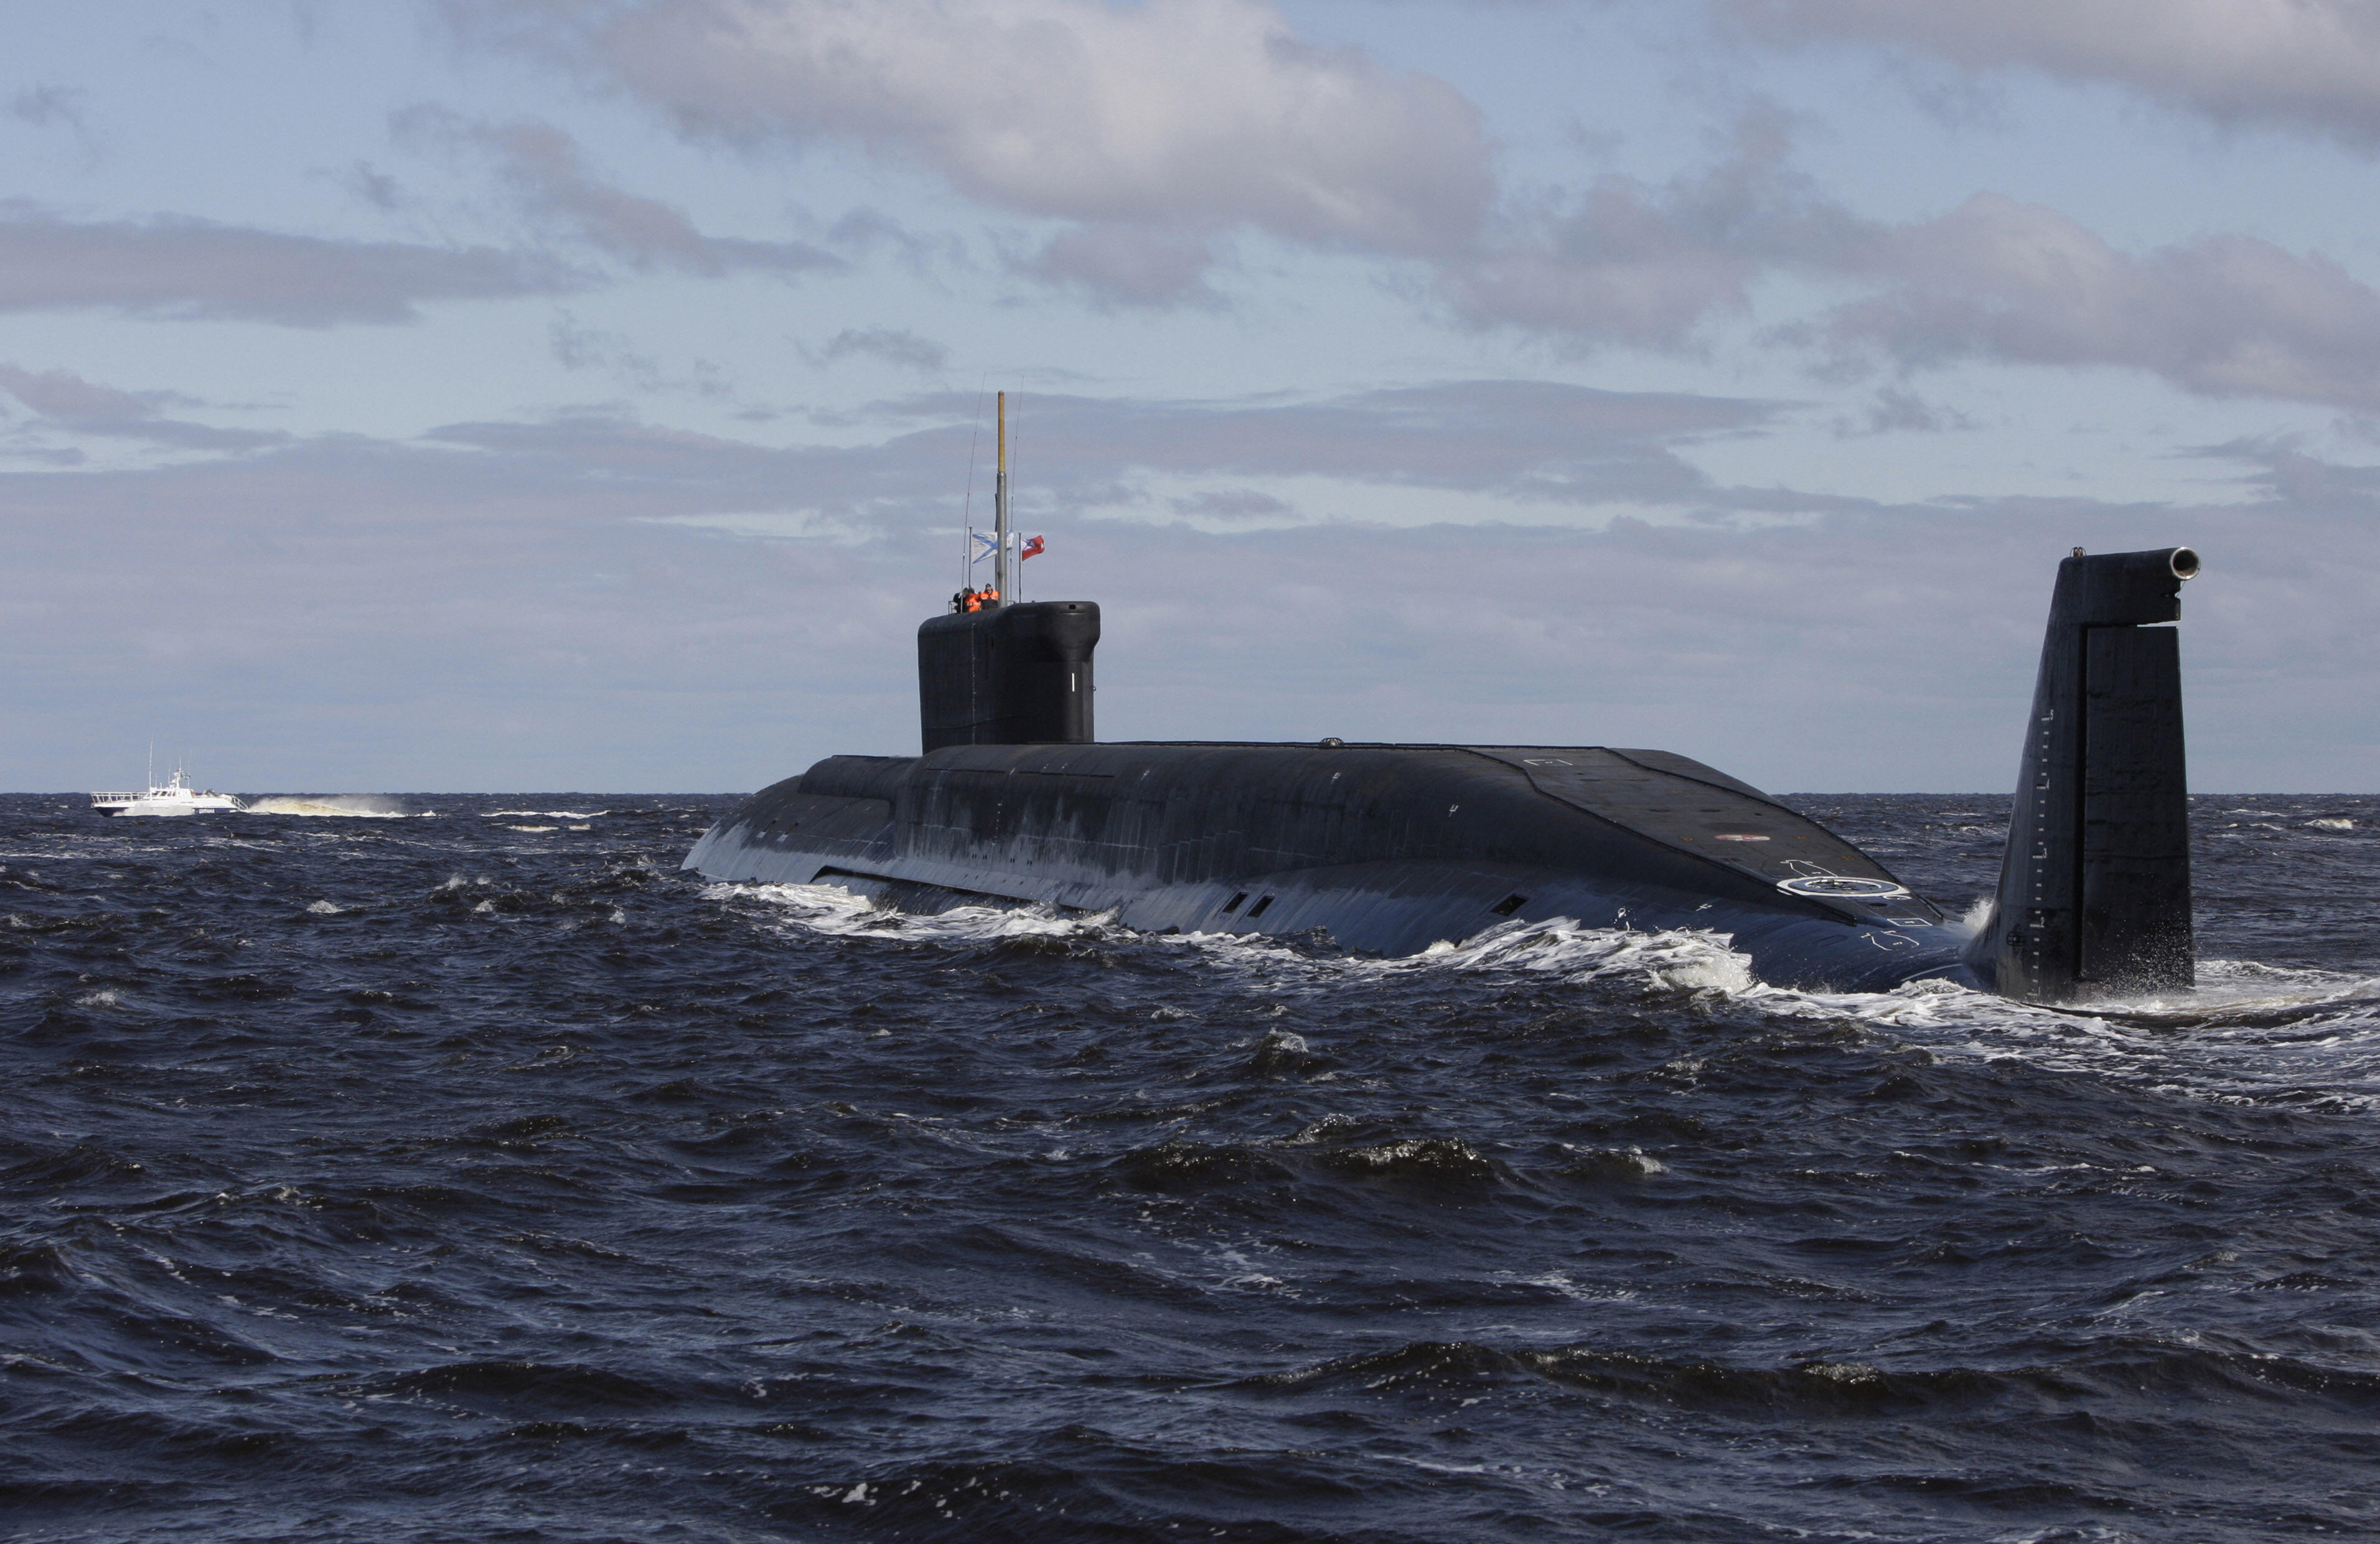 A new Russian nuclear submarine. Photo: ALEXANDER ZEMLIANICHENKO/AFP/Getty Images)